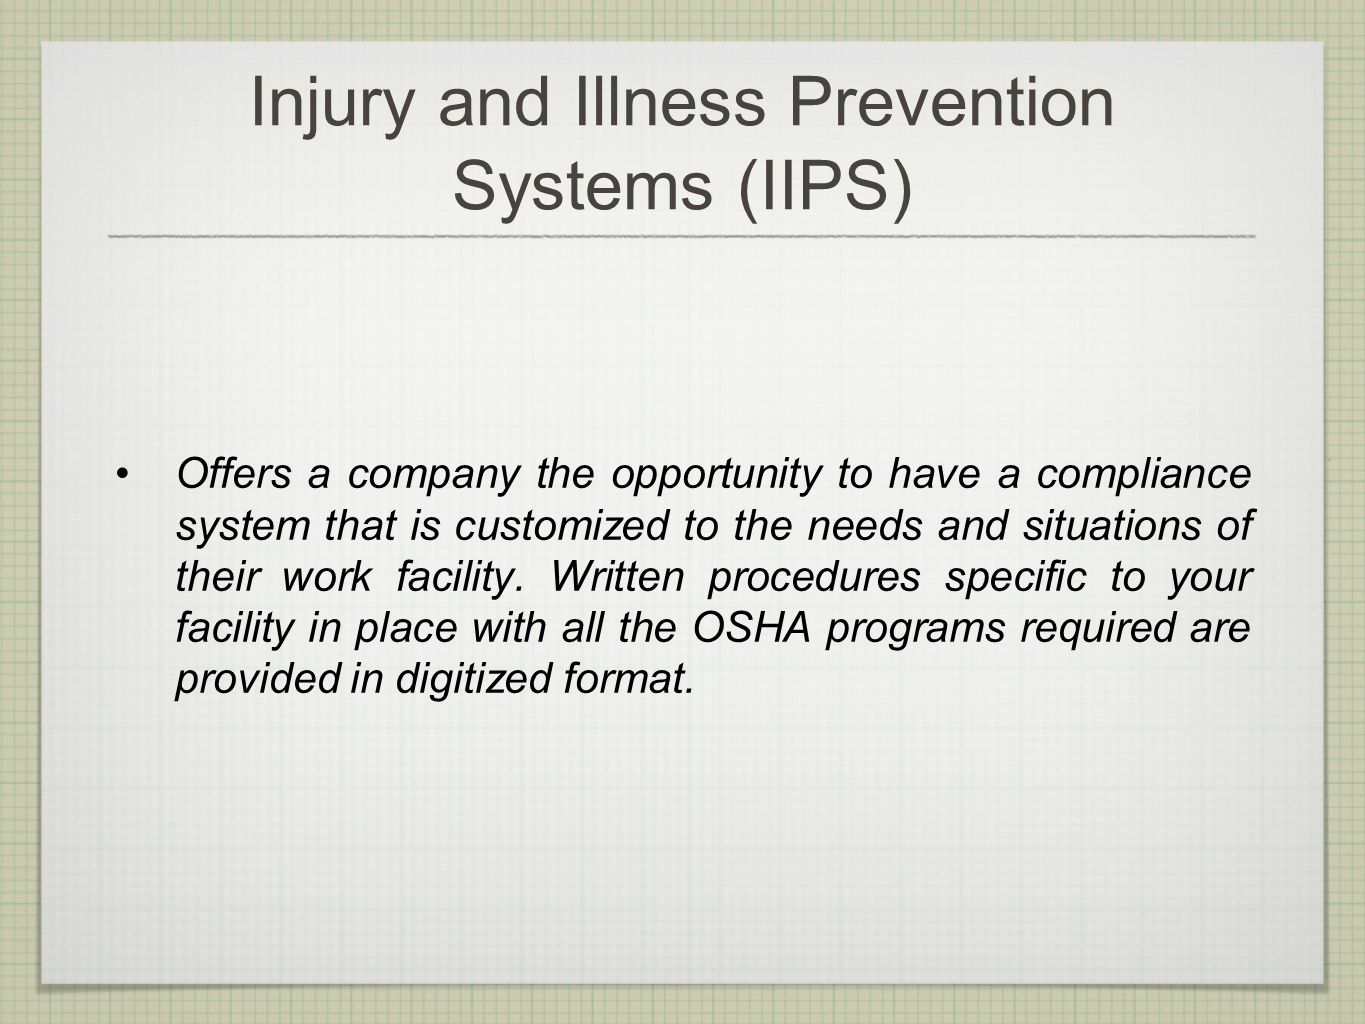 Injury and Illness Prevention Systems (IIPS) Offers a company the opportunity to have a compliance system that is customized to the needs and situations of their work facility.